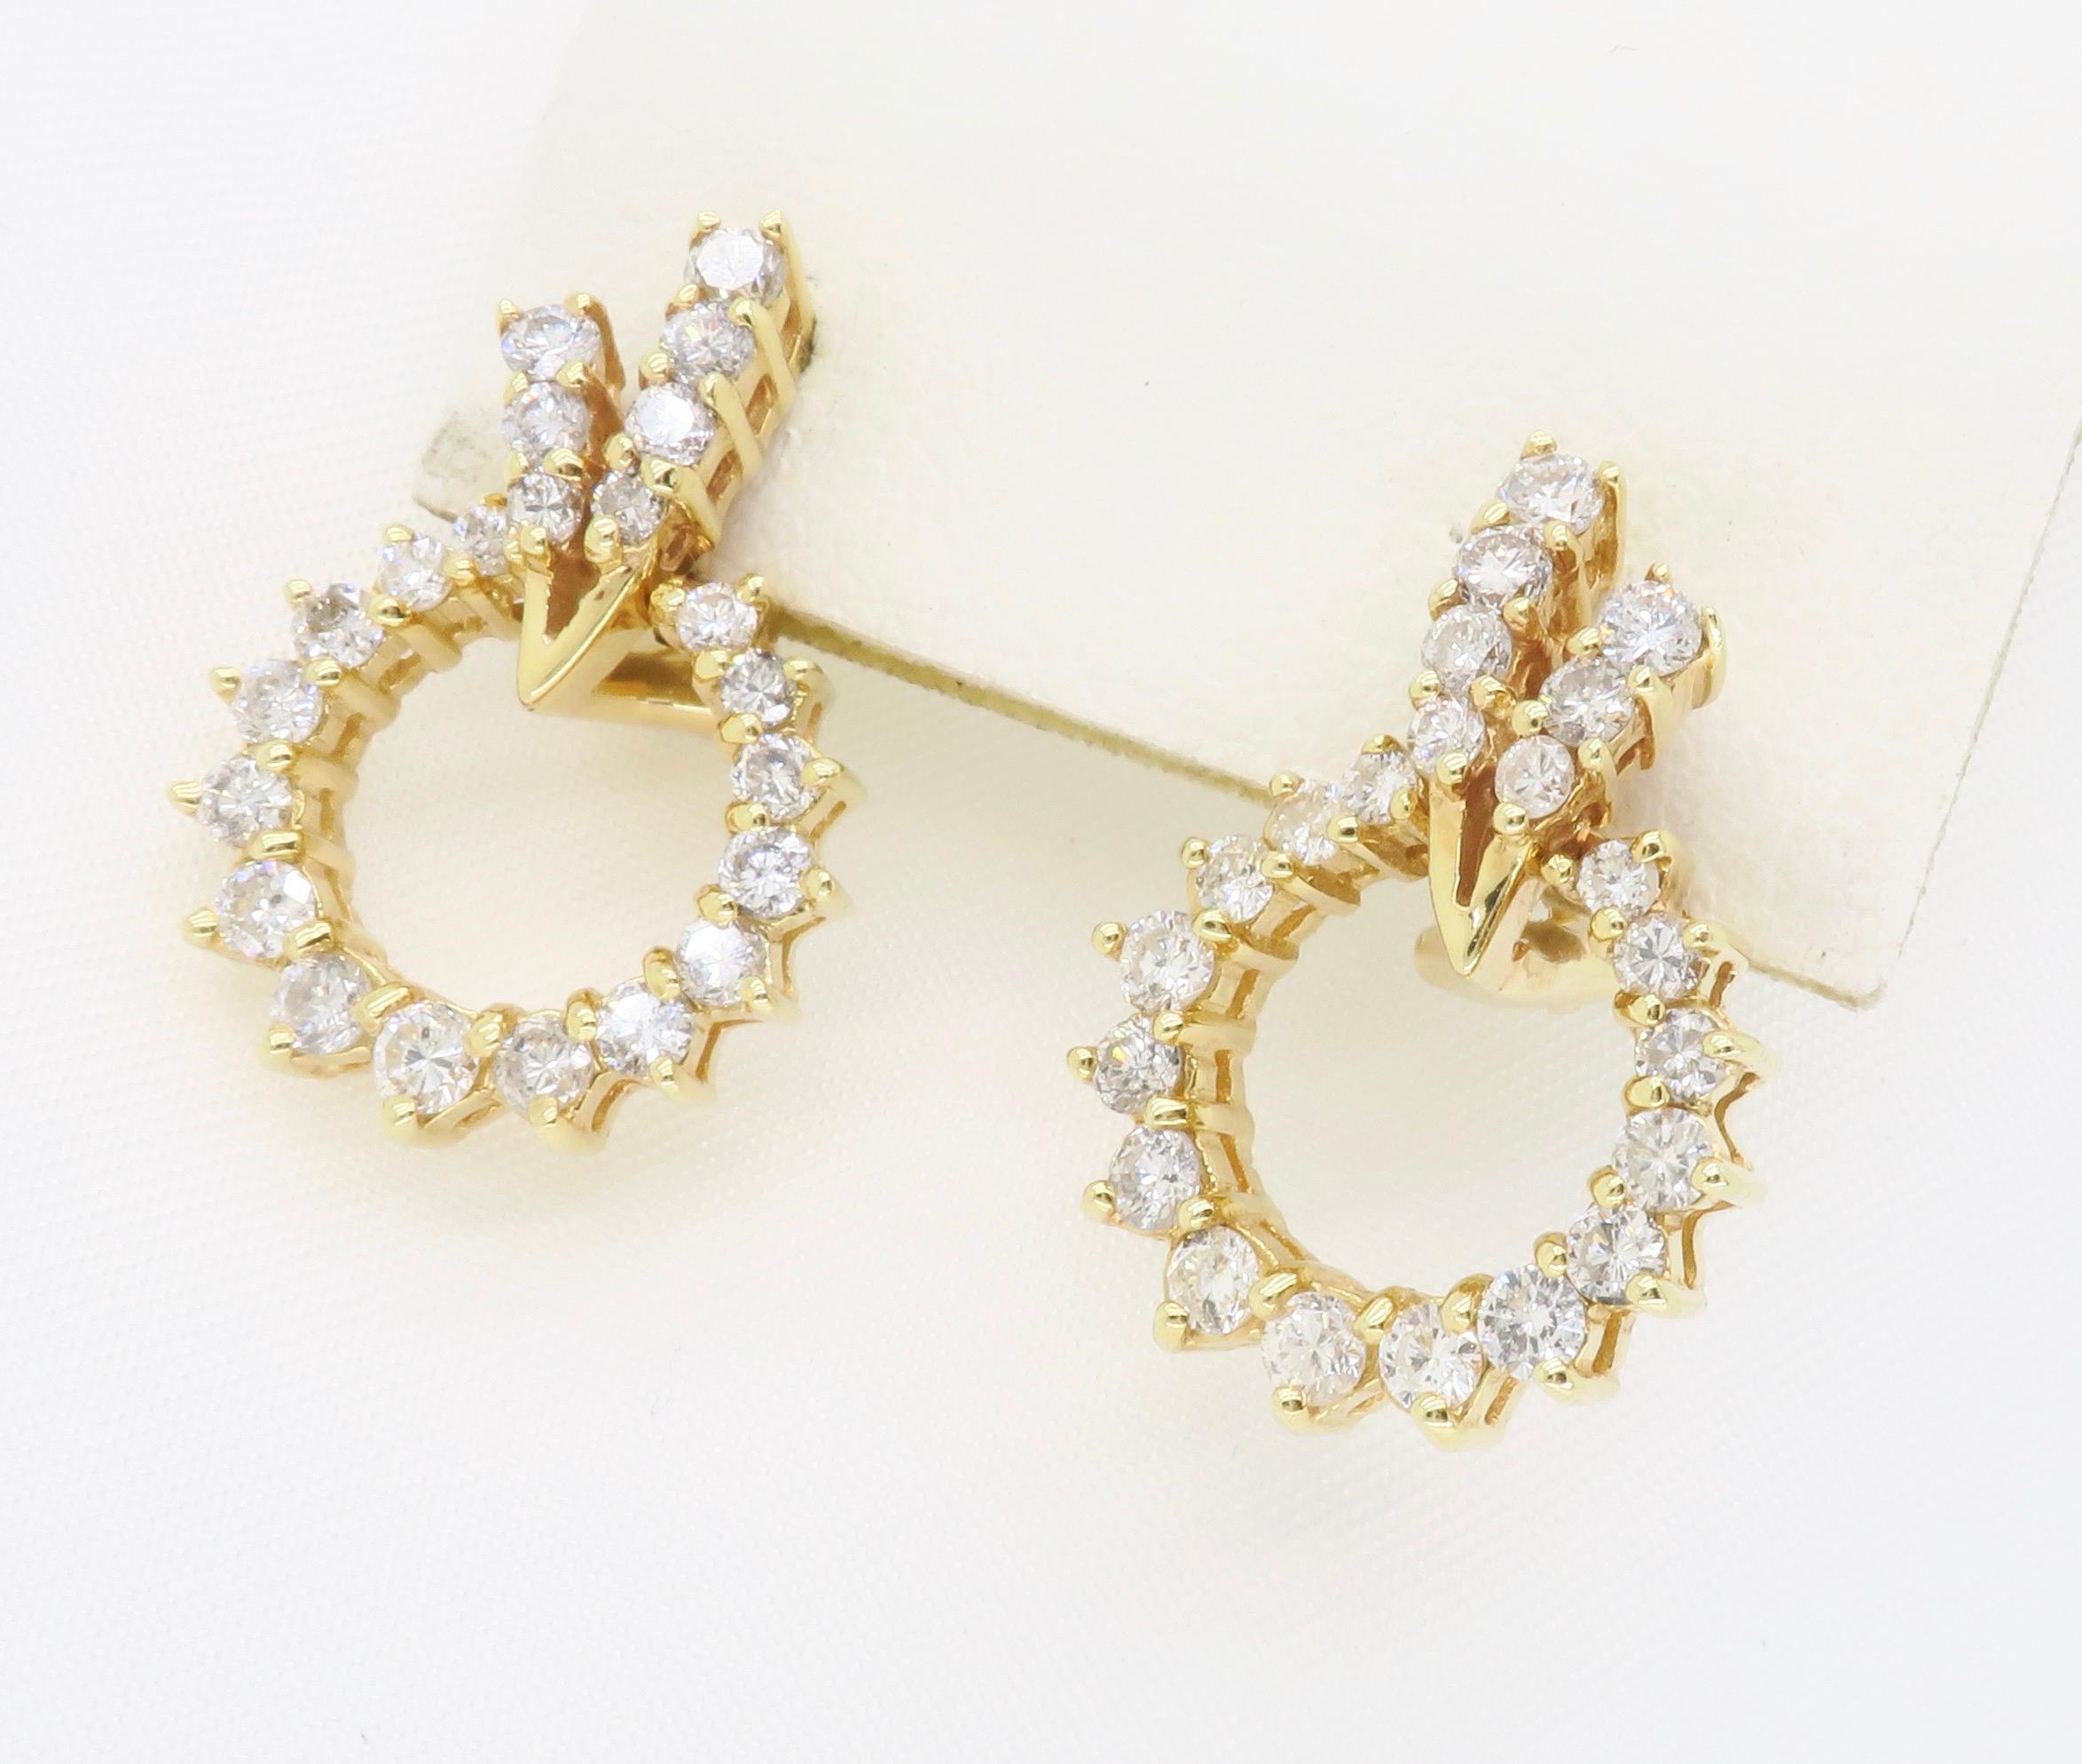 Unique 14k yellow gold omega back earrings set with 1.20ctw of Round diamonds.

Diamond Carat Weight: Approximately 1.20CTW 
Diamond Cut:  Round Brilliant cut
Color: Average G-I
Clarity: Average SI
Metal: 14K Yelllow Gold 
Marked/Tested: Stamped